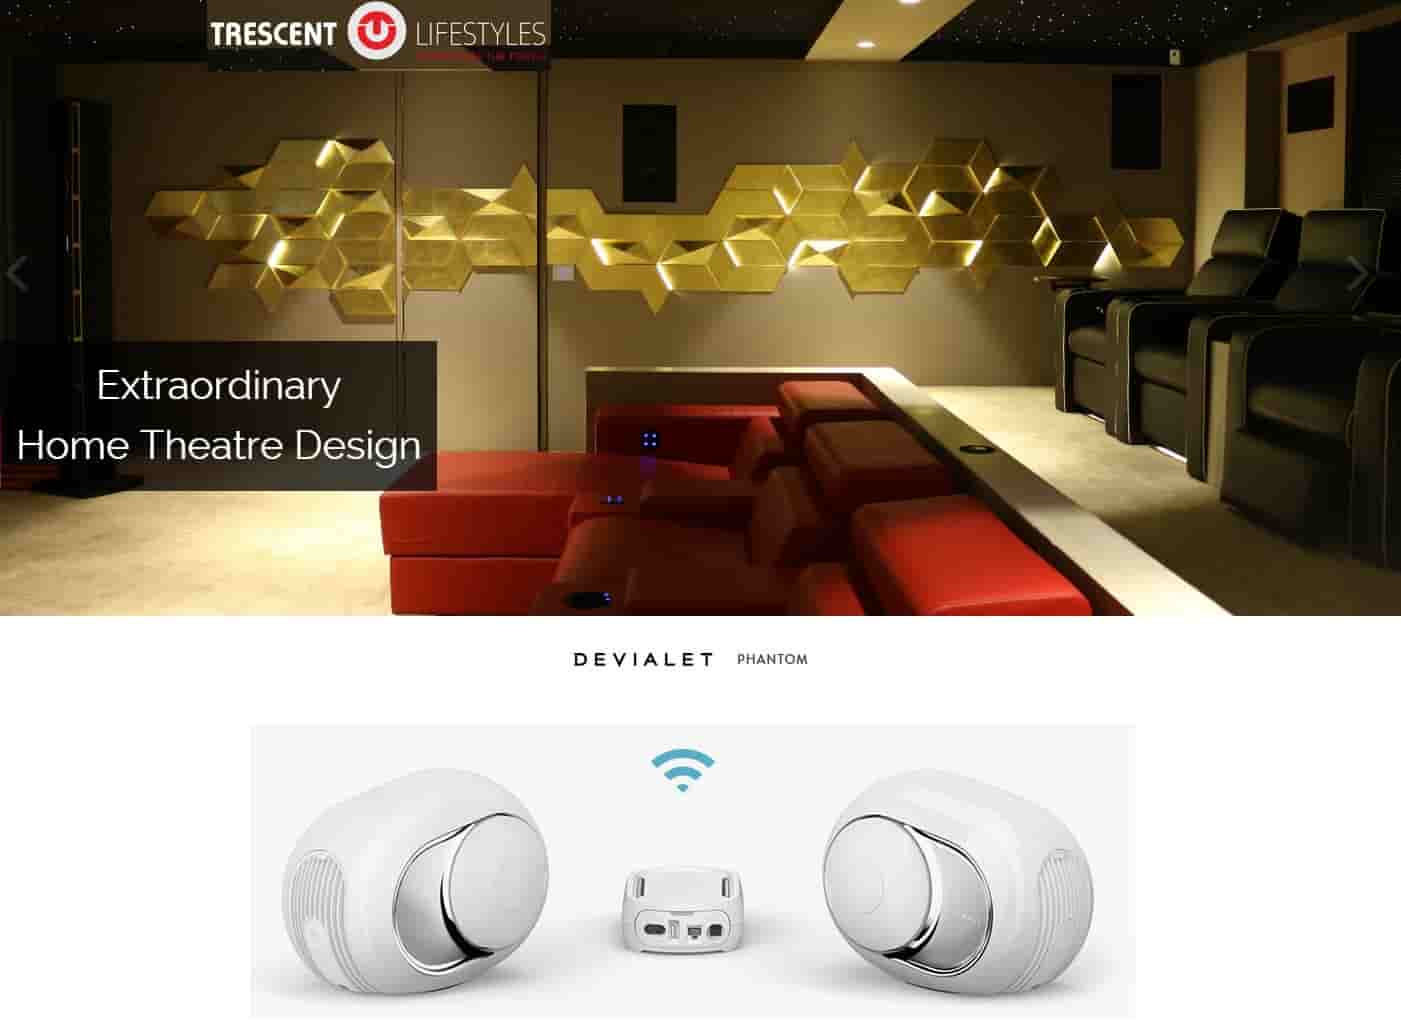 Trescent Lifestyles is the ultimate destination for those who appreciate cutting-edge technology in home theatres, audio-video and home automation systems in India. http://www.trescent.com/ | Founded in 2007 and based in Paris, Devialet is the premier start-up in the world for the excellence of its inventions in the sound field, with 107 patents and more than 60 International awards. en.devialet.com